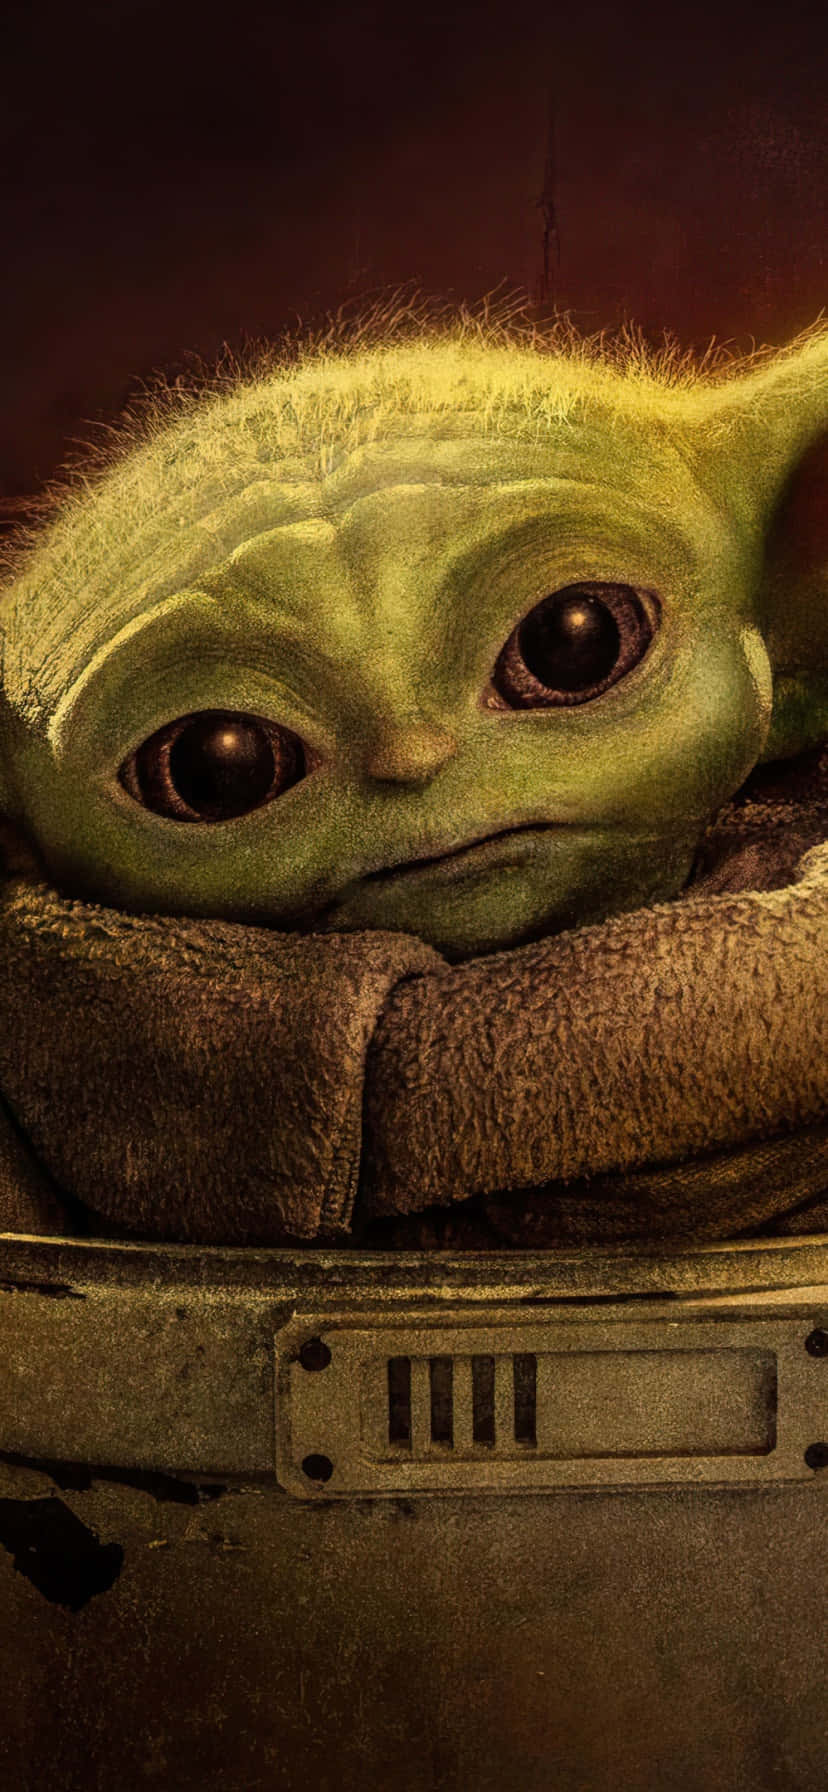 Embrace the Force with a Baby Yoda Phone Wallpaper